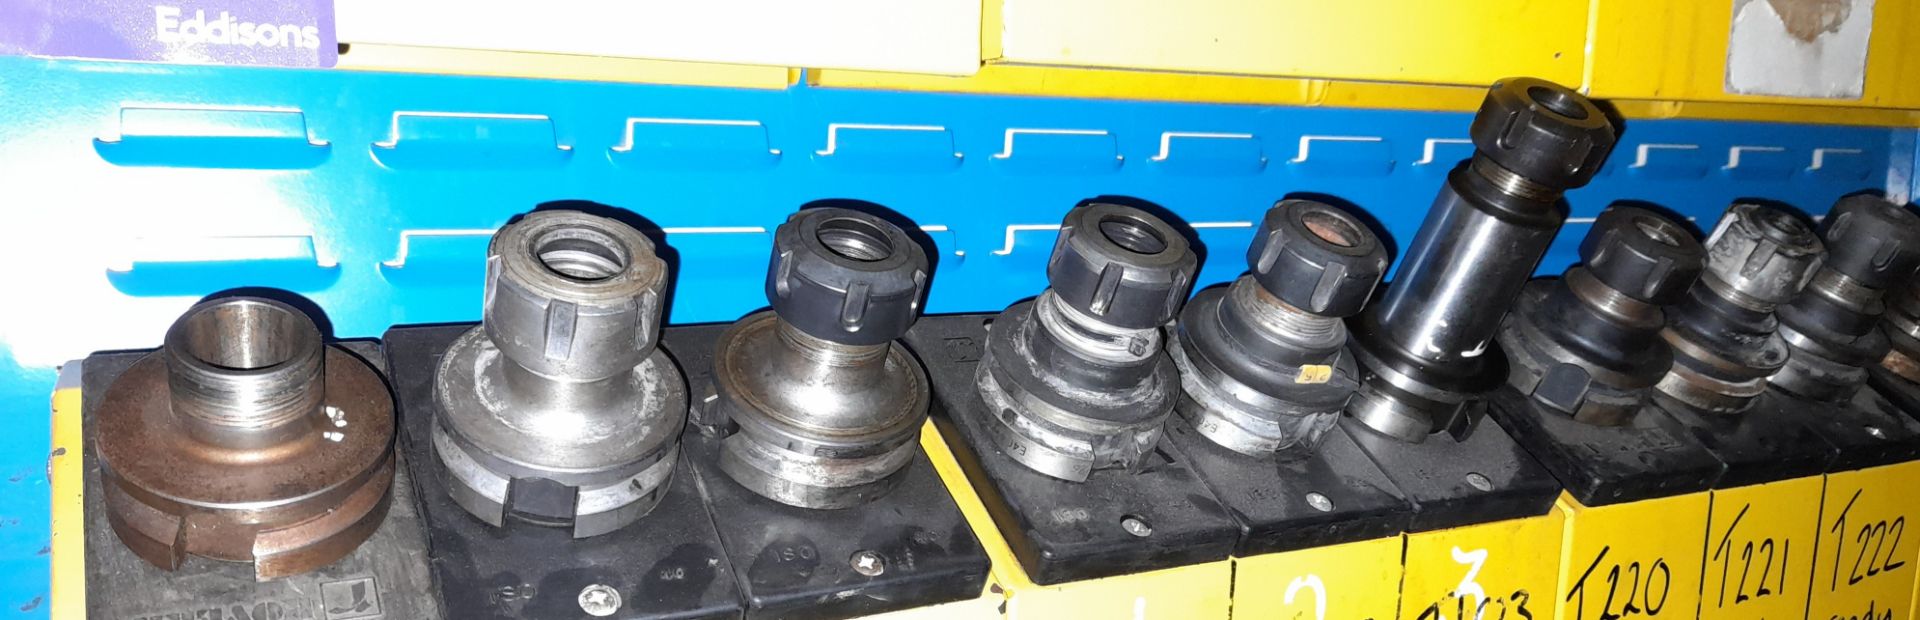 11 x Various BT40 extension CNC tool holders, to yellow holder (rack not included) - Image 2 of 3